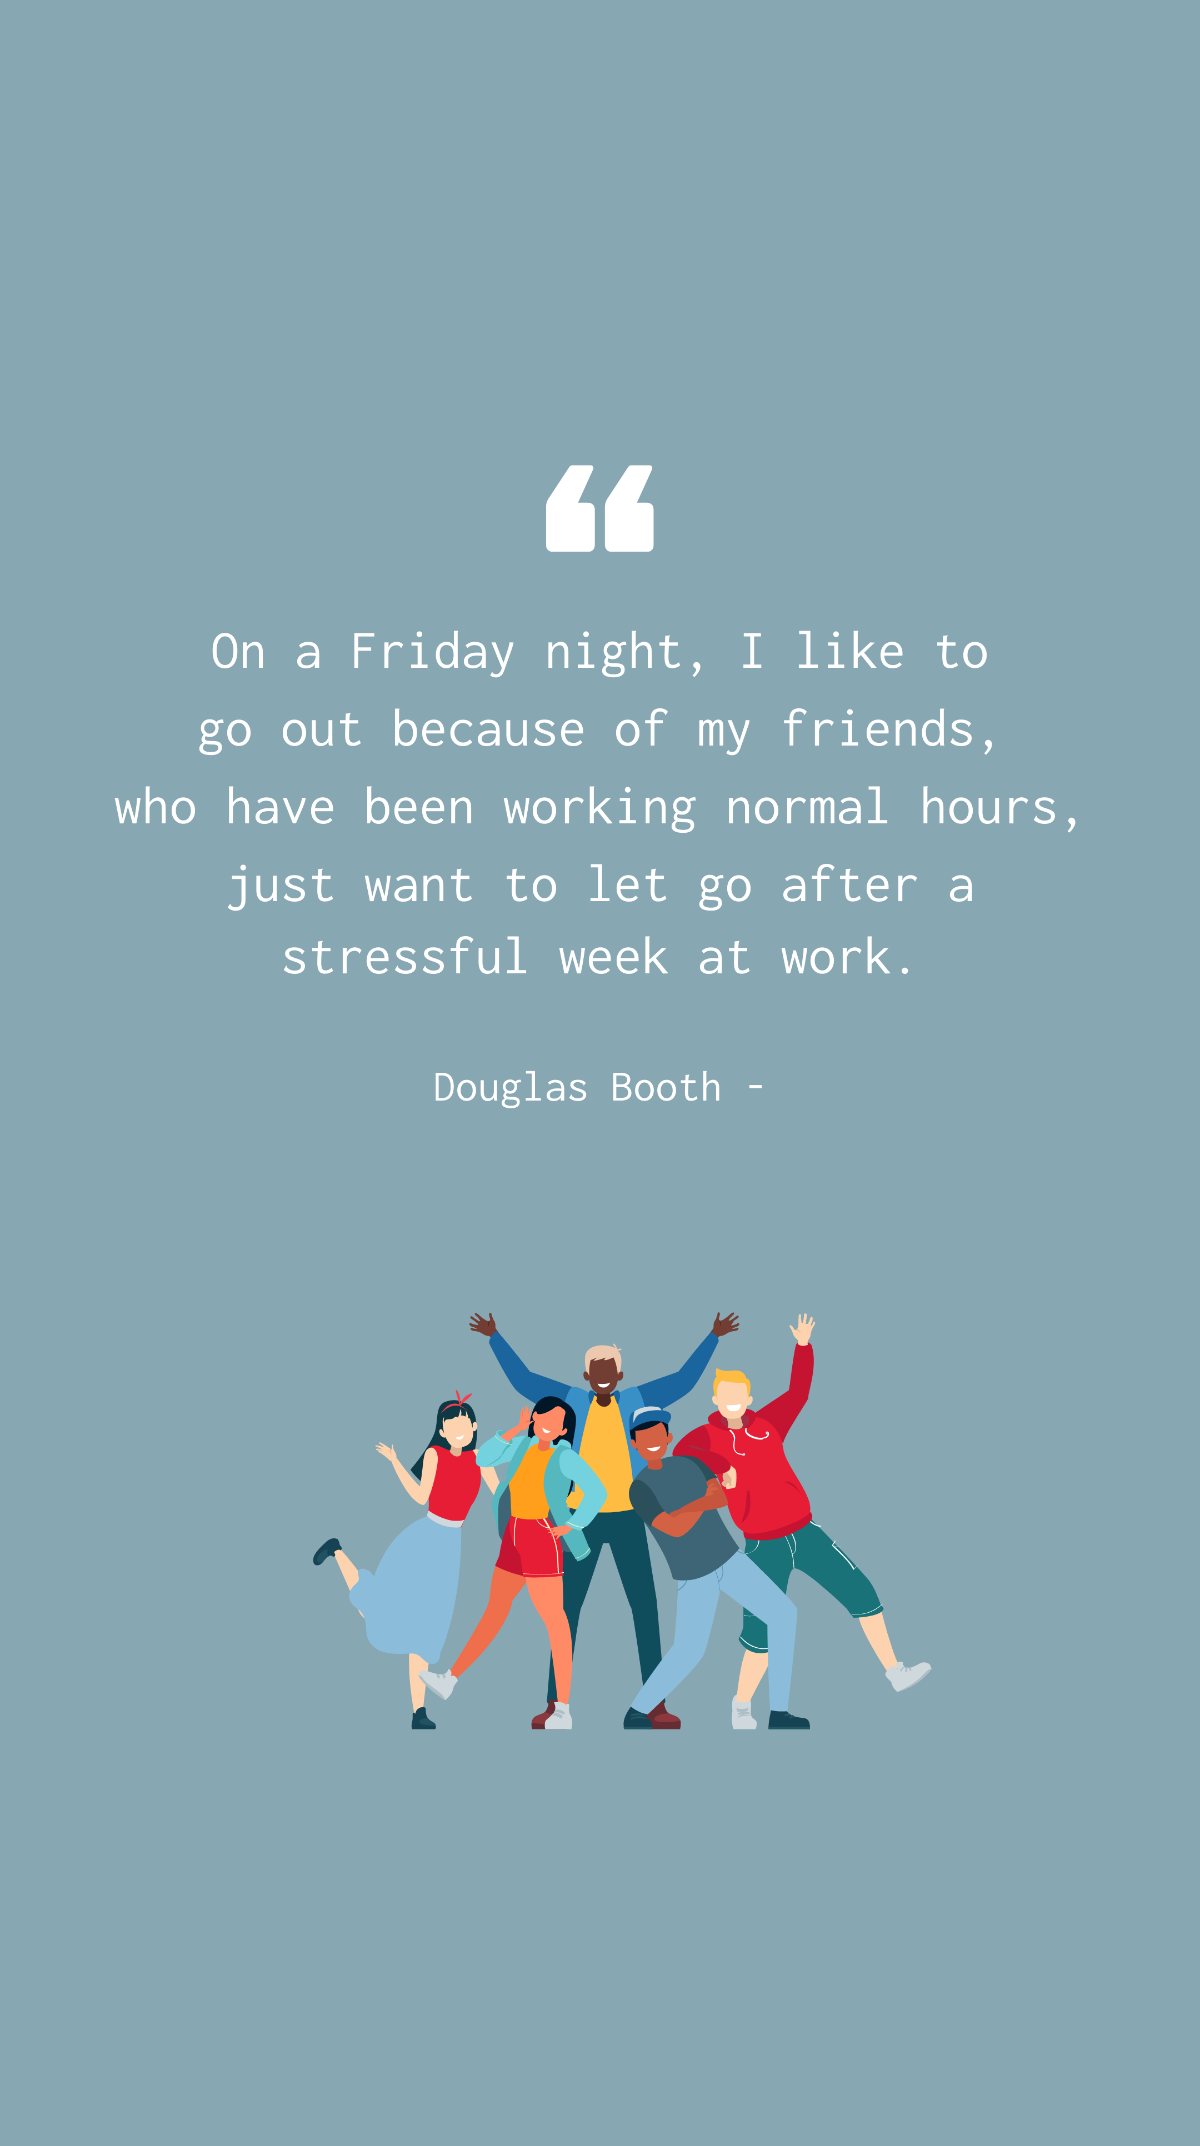 Douglas Booth - On a Friday night, I like to go out because of my friends, who have been working normal hours, just want to let go after a stressful week at work.